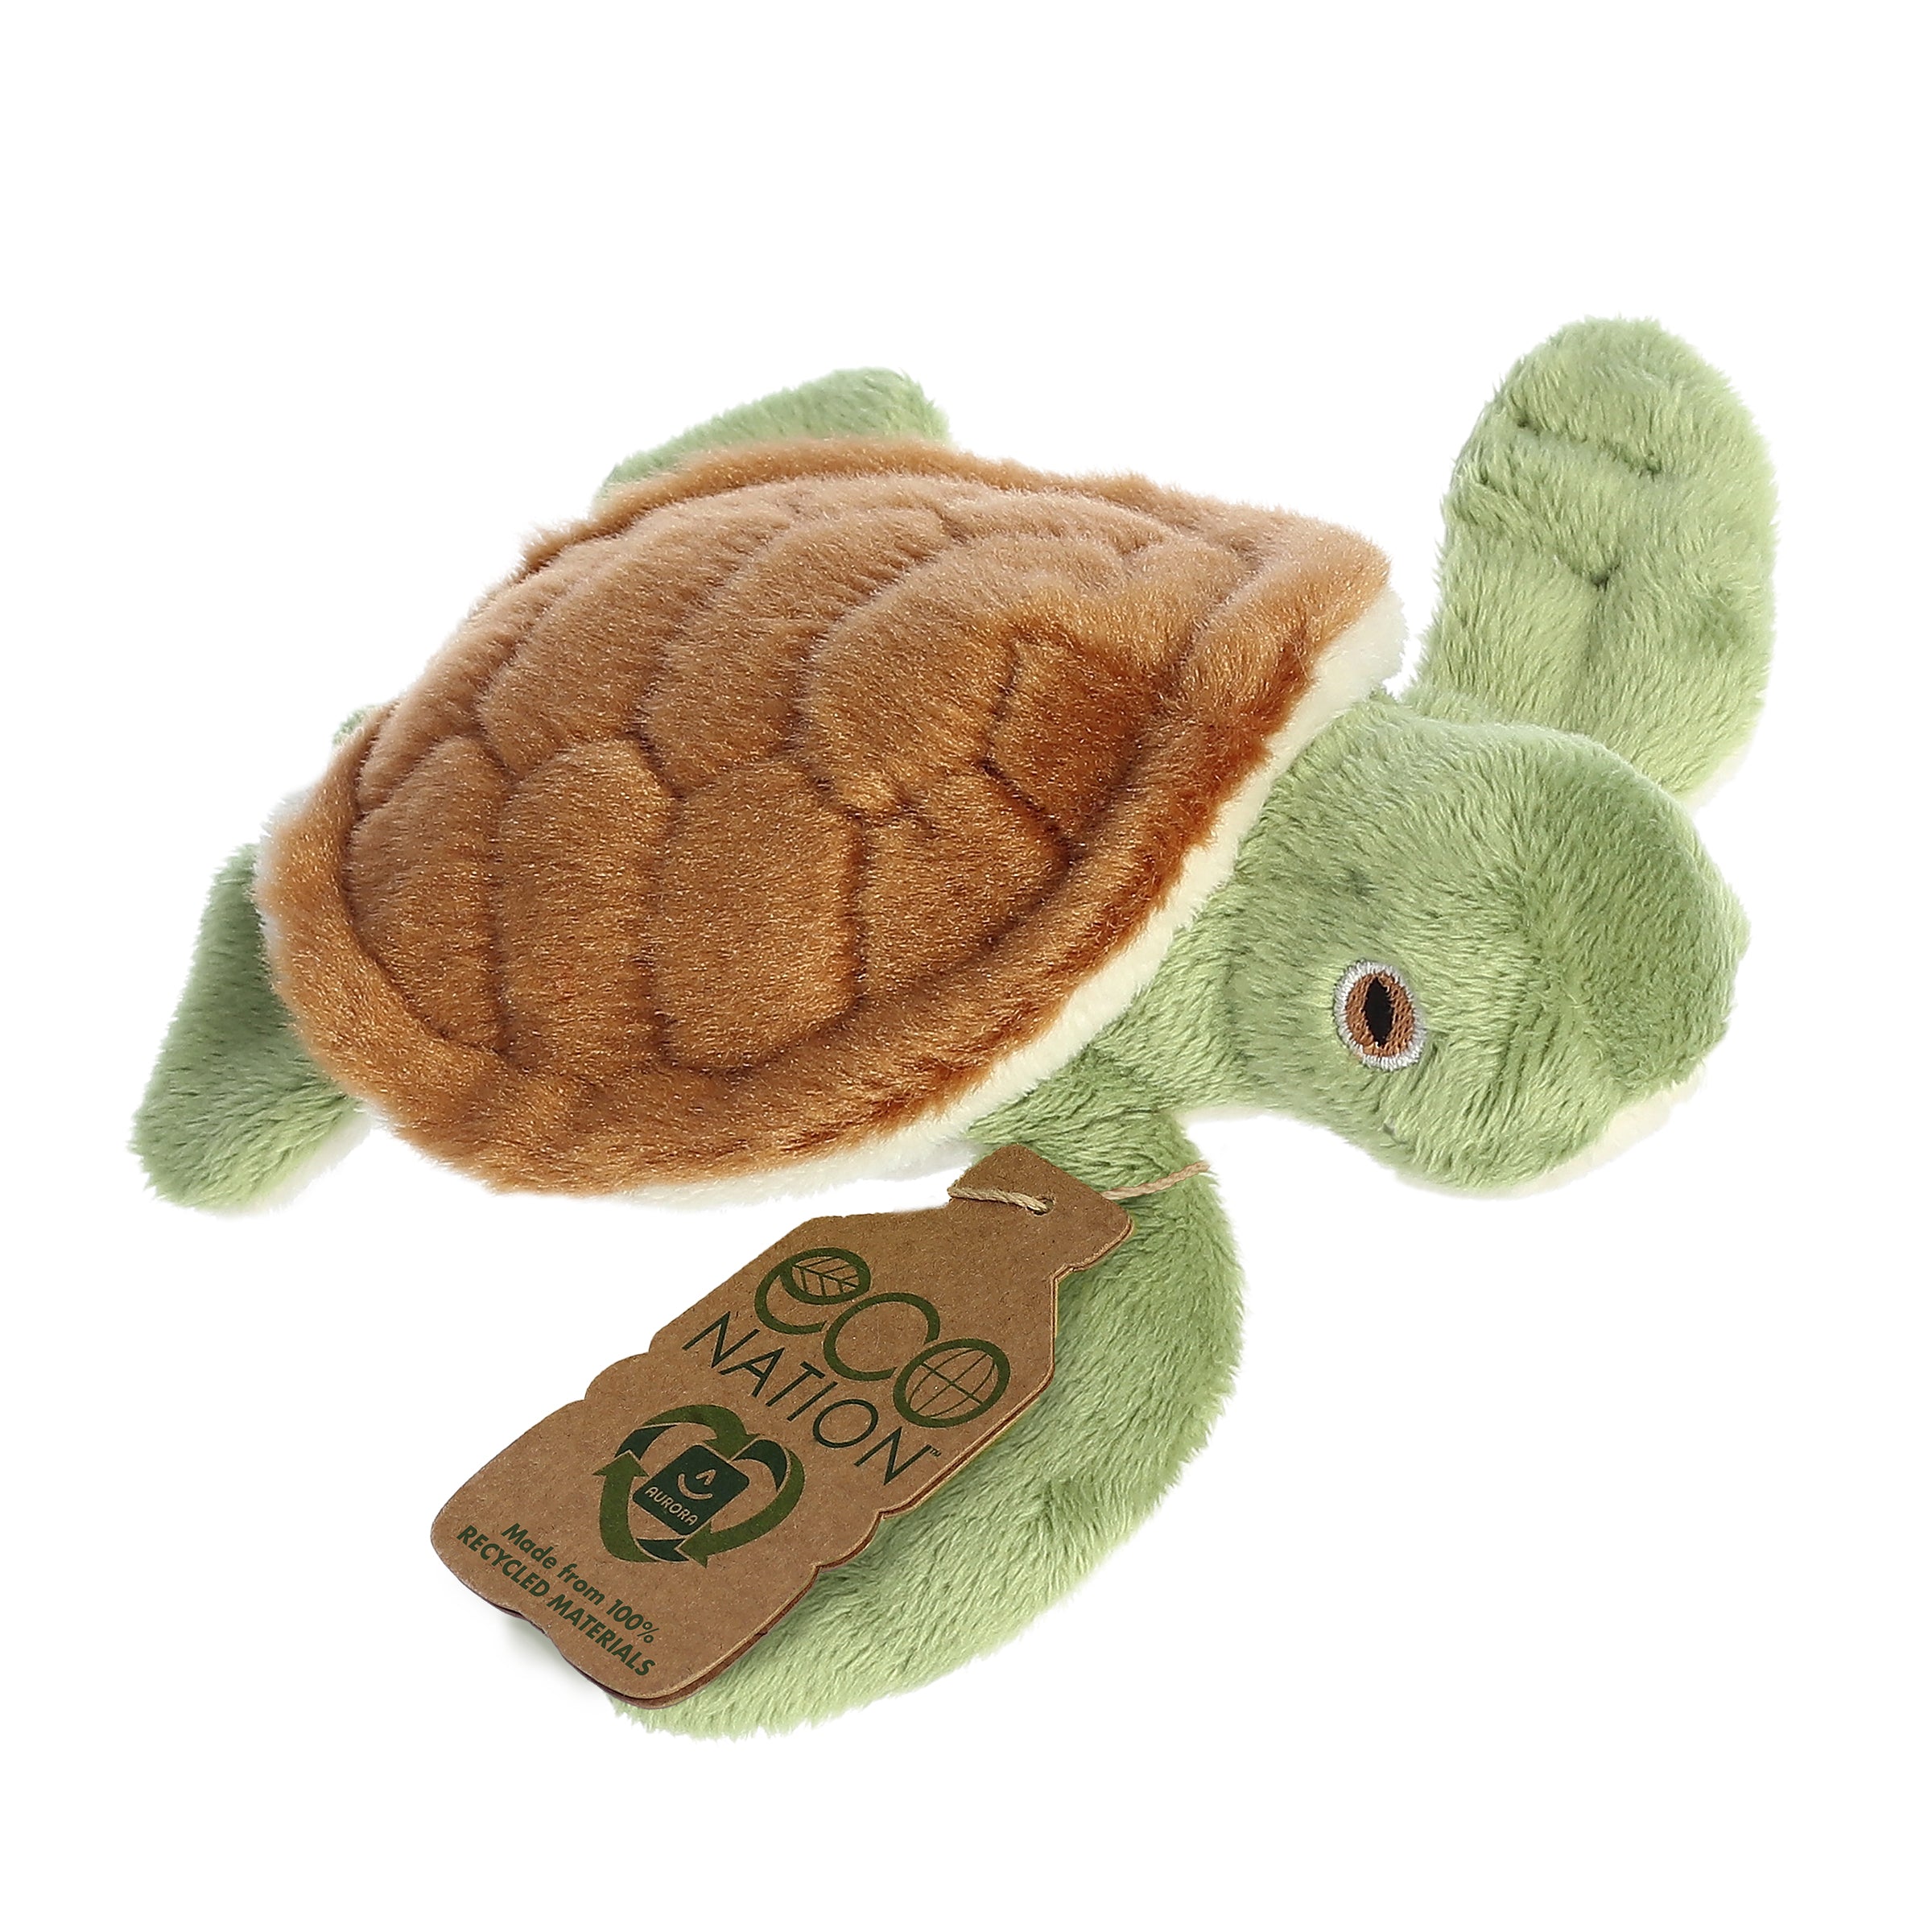 An endearing turtle plush with a brown shell and green body, and an eco-nation tag on its right fin.